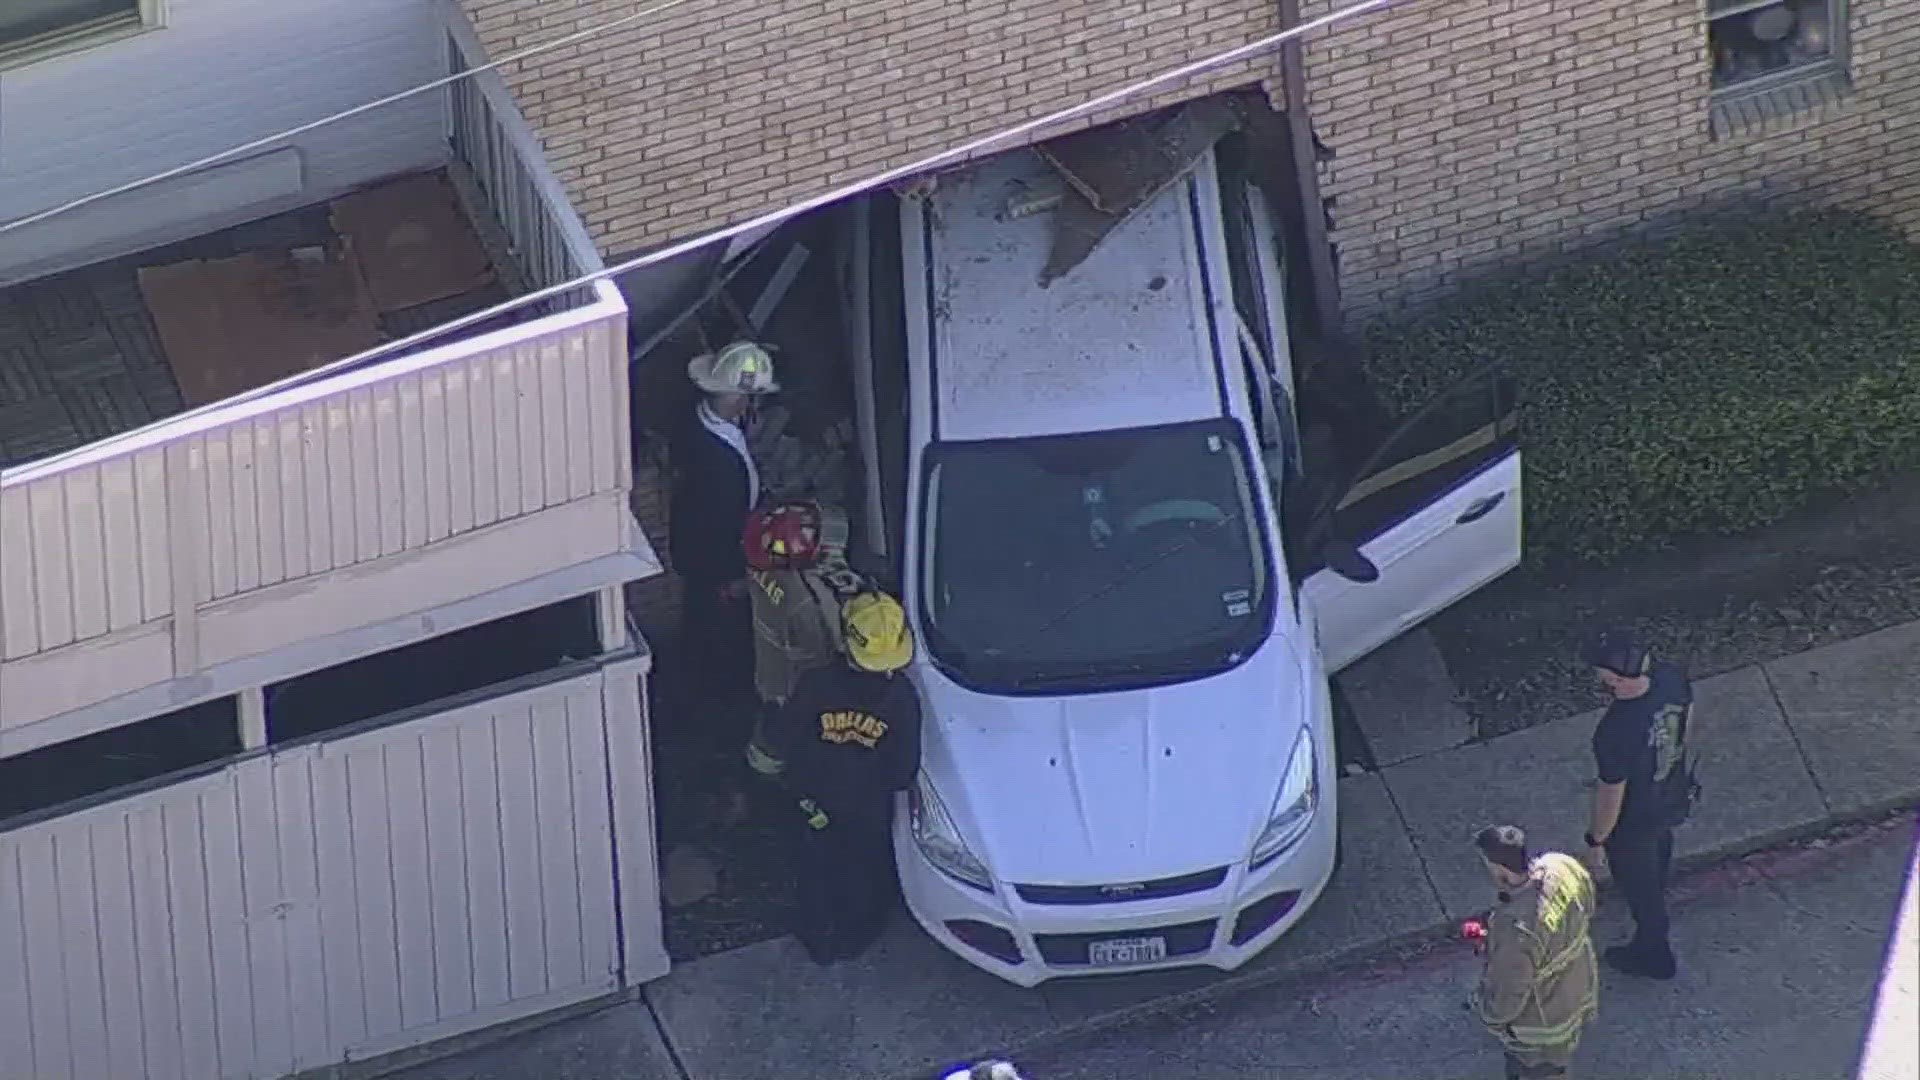 Thankfully no one was injured when a car ran into a North Texas apartment complex.